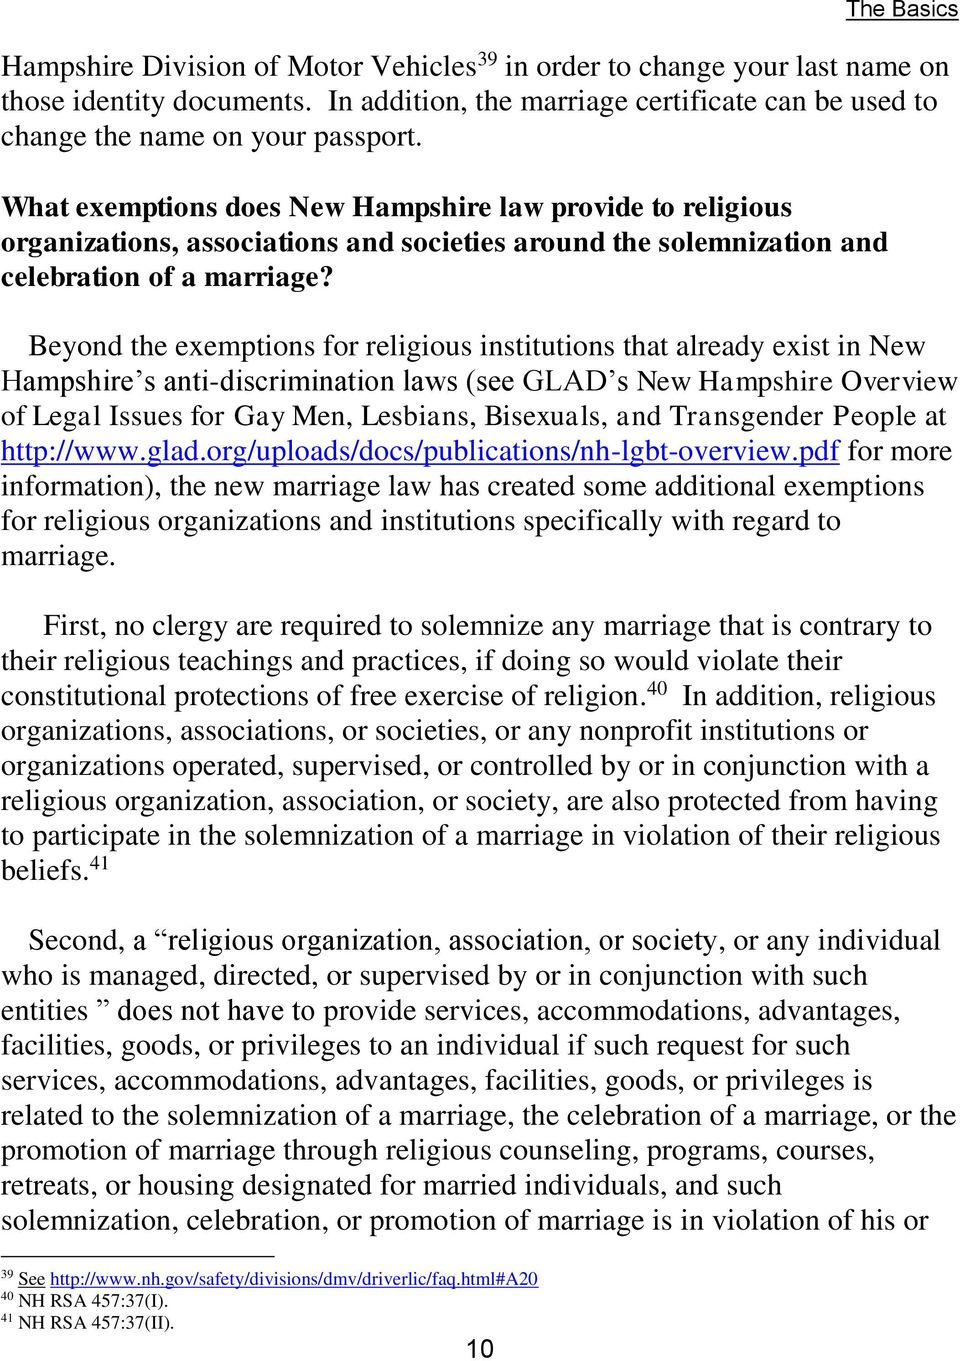 What exemptions does New Hampshire law provide to religious organizations, associations and societies around the solemnization and celebration of a marriage?